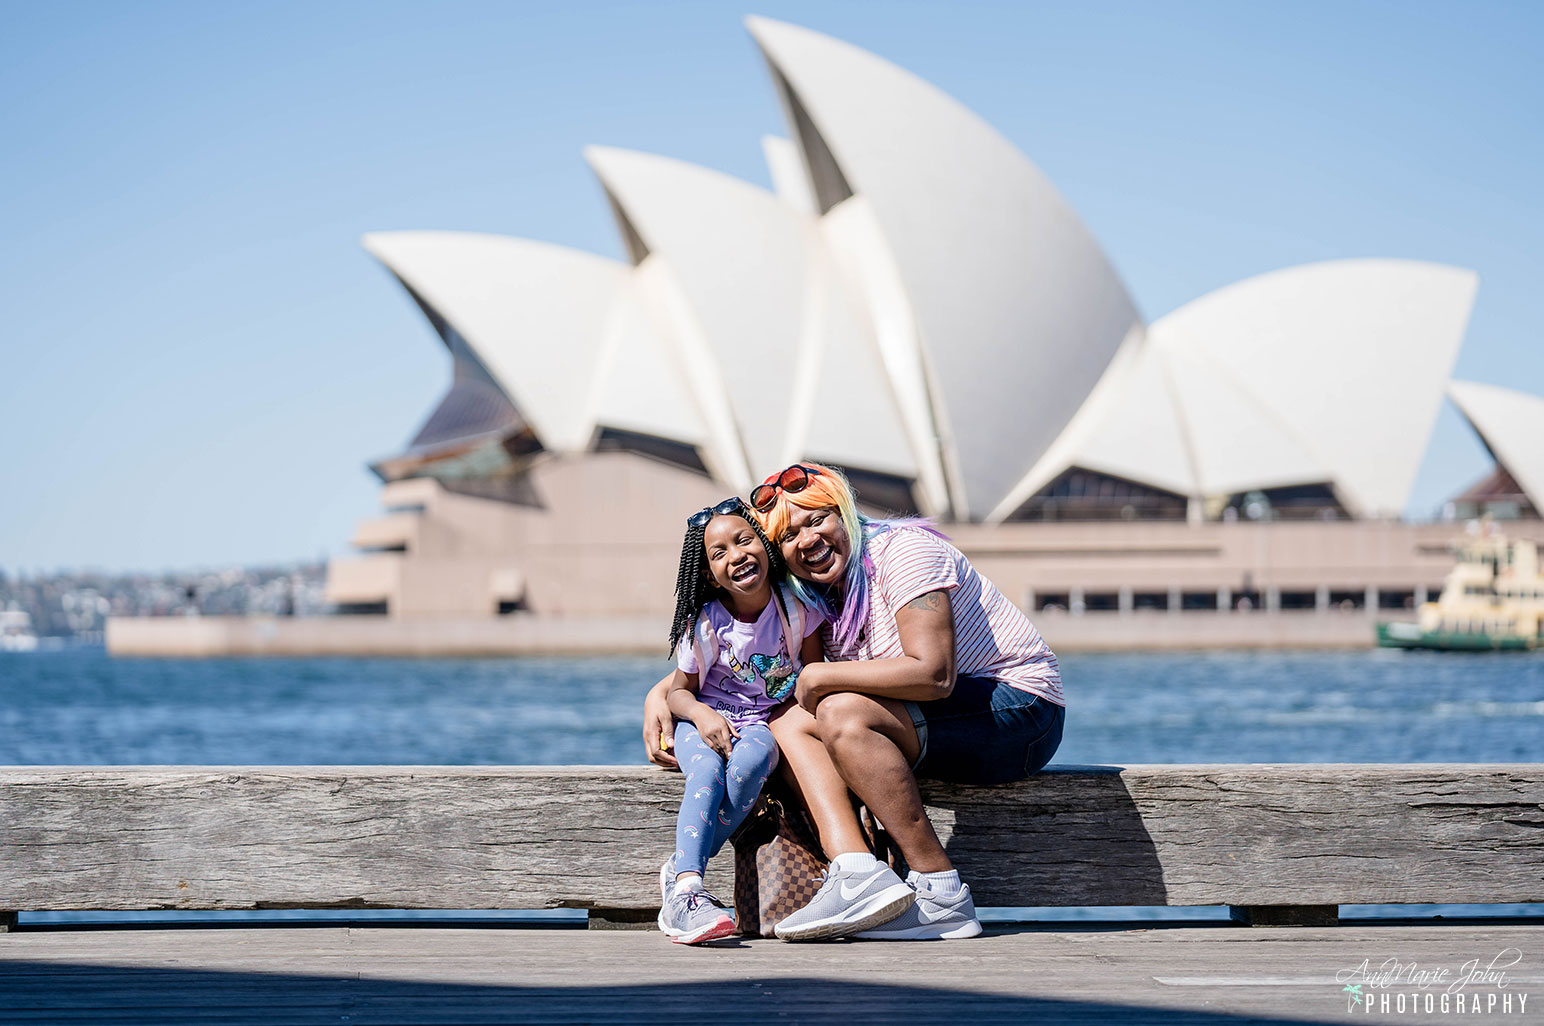 Best Cheap or Free Things To Do in Sydney, Australia ~ #SeeAustralia